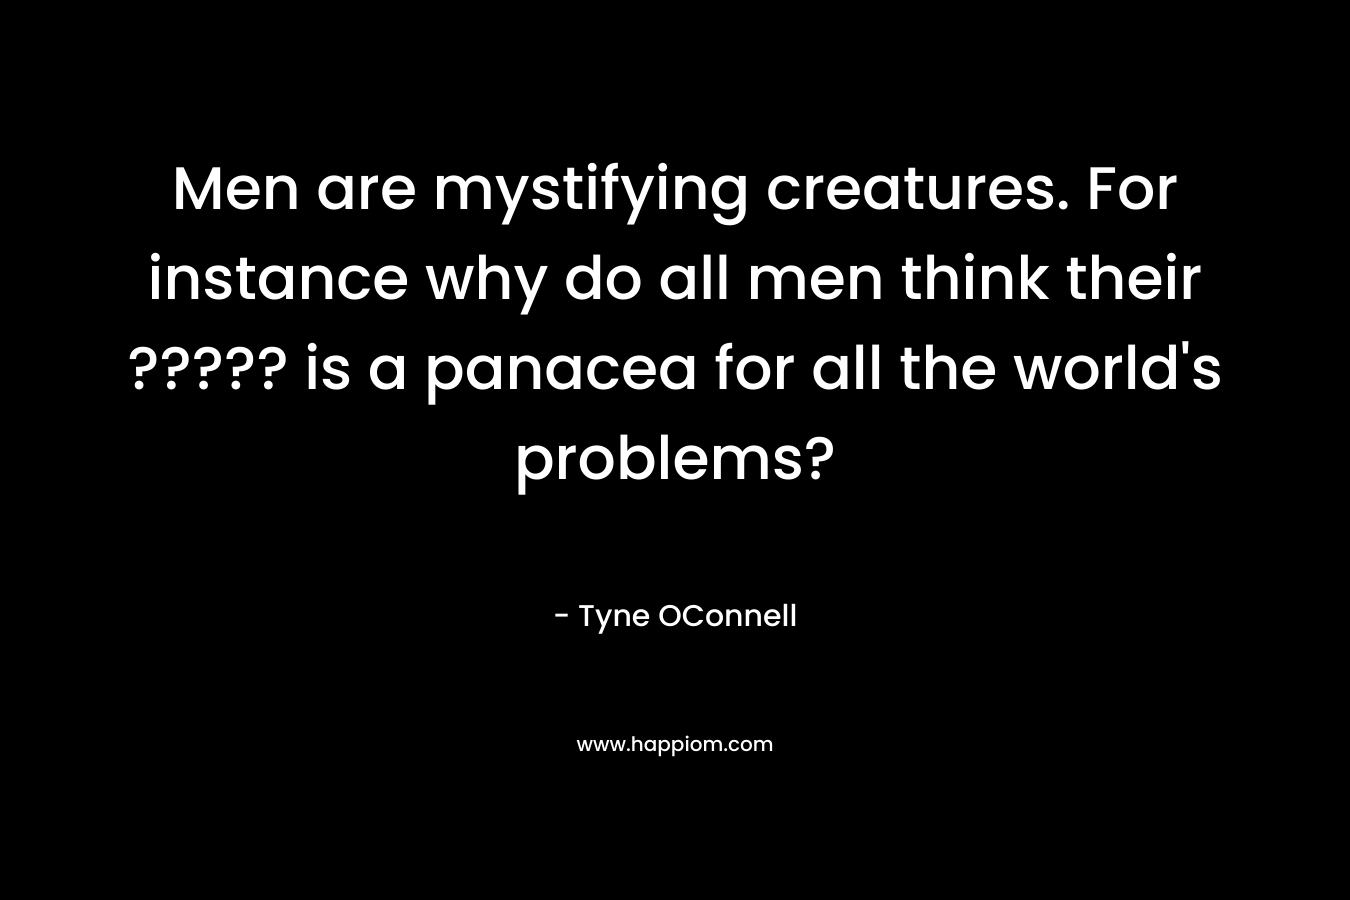 Men are mystifying creatures. For instance why do all men think their ????? is a panacea for all the world’s problems? – Tyne OConnell